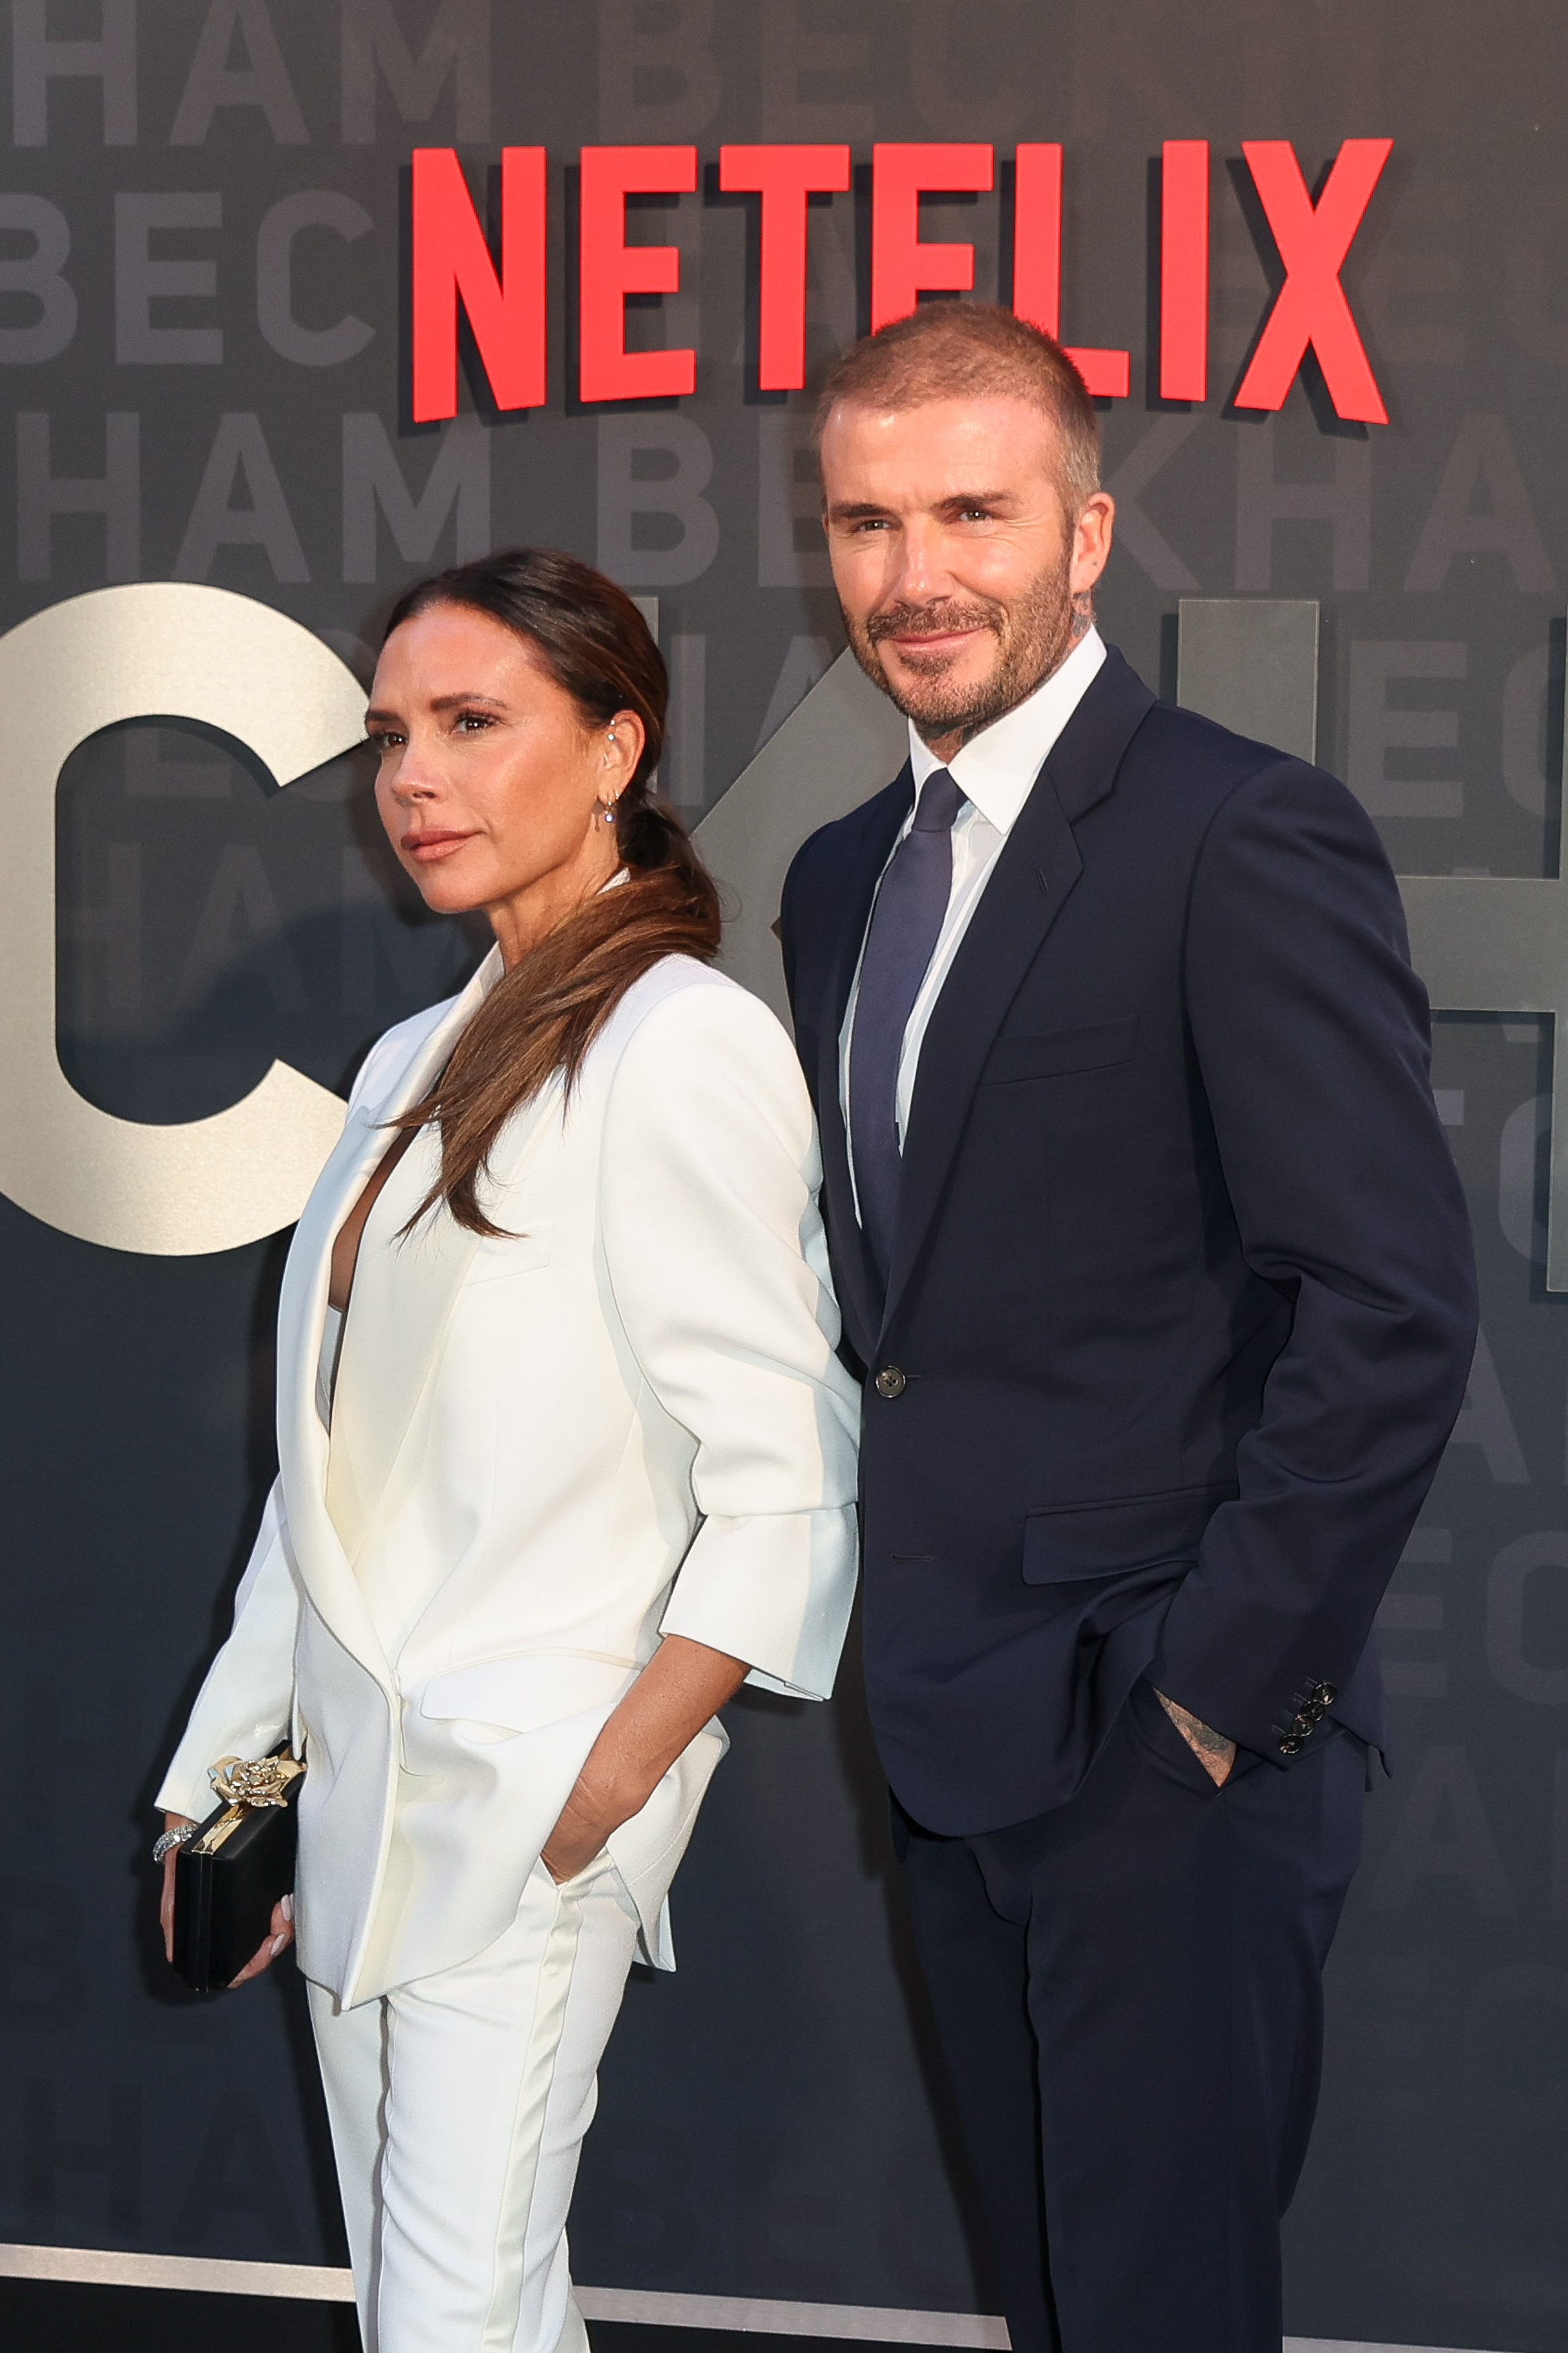 Victoria and David Beckham attend the UK premiere of "Beckham" in London, England on October 3, 2023 | Source: Getty Images